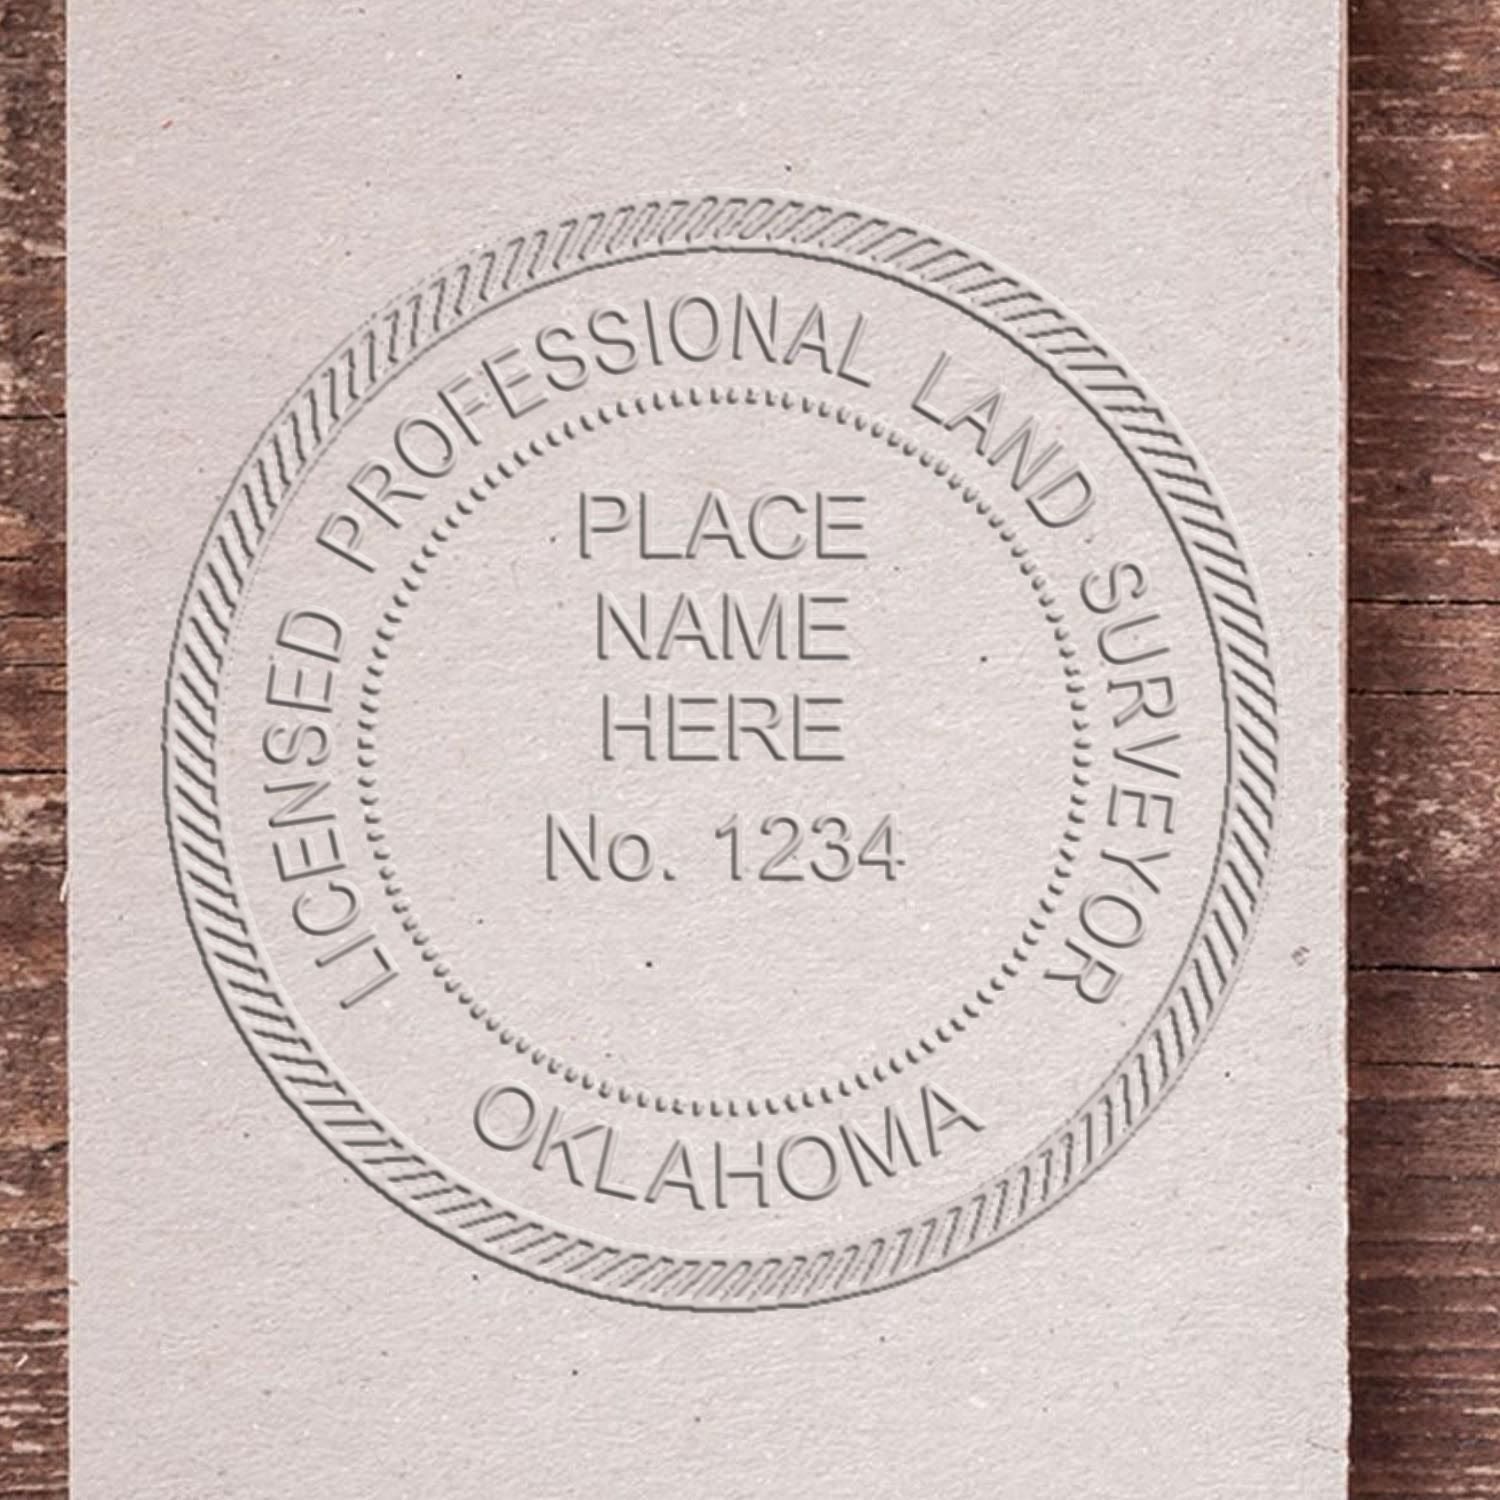 Another Example of a stamped impression of the Heavy Duty Cast Iron Oklahoma Land Surveyor Seal Embosser on a piece of office paper.